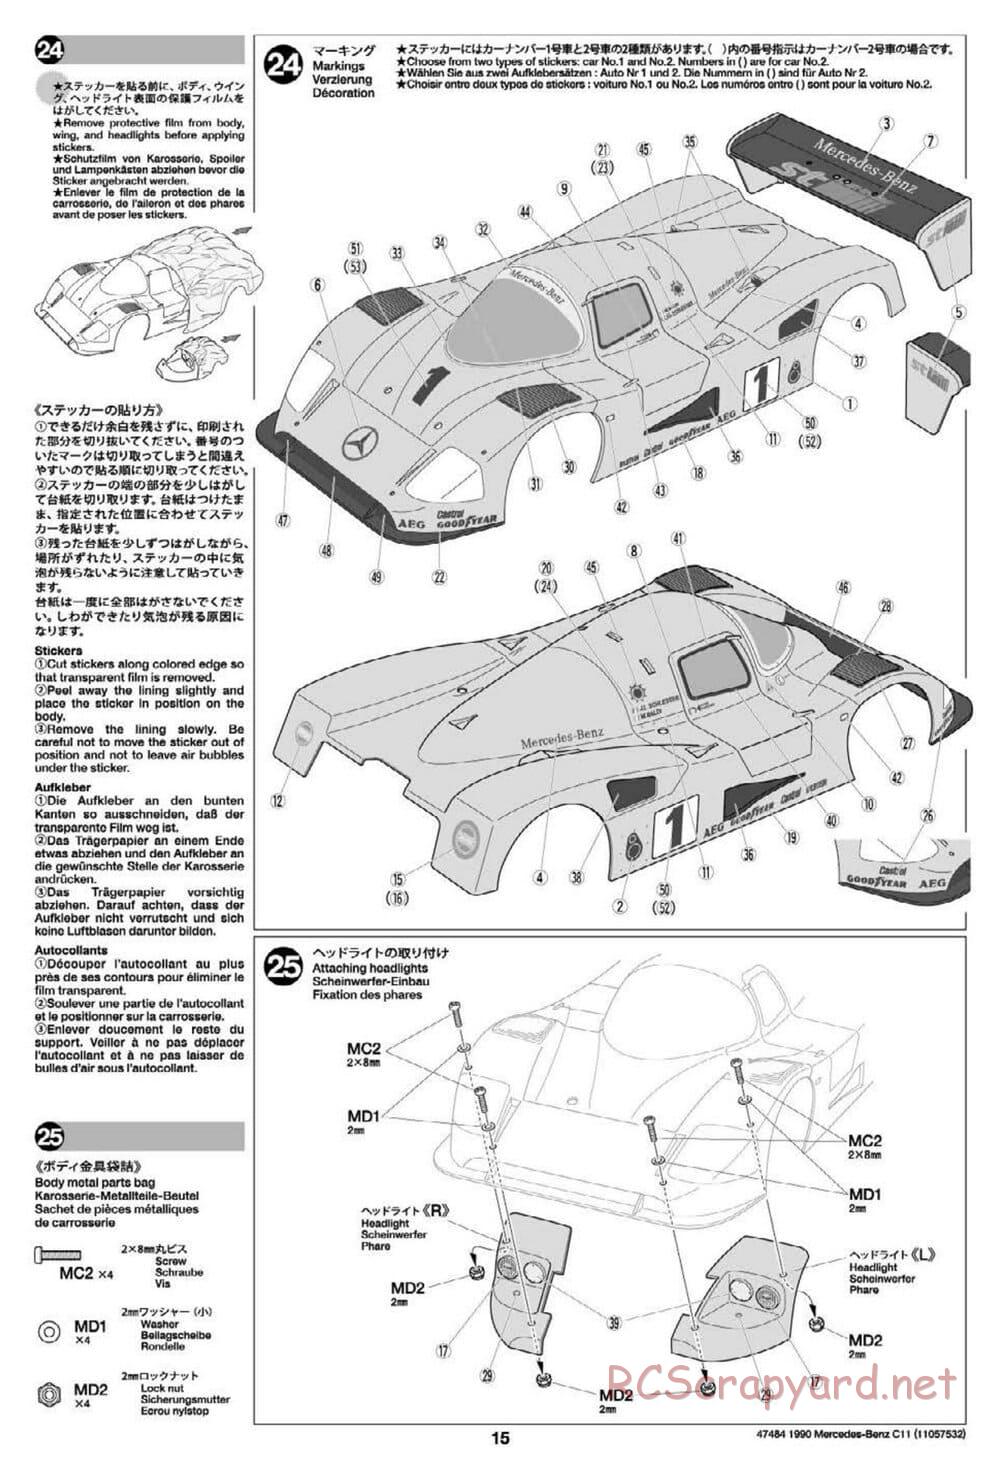 Tamiya - 1990 Mercedes-Benz C11 - Group-C Chassis - Manual - Page 15